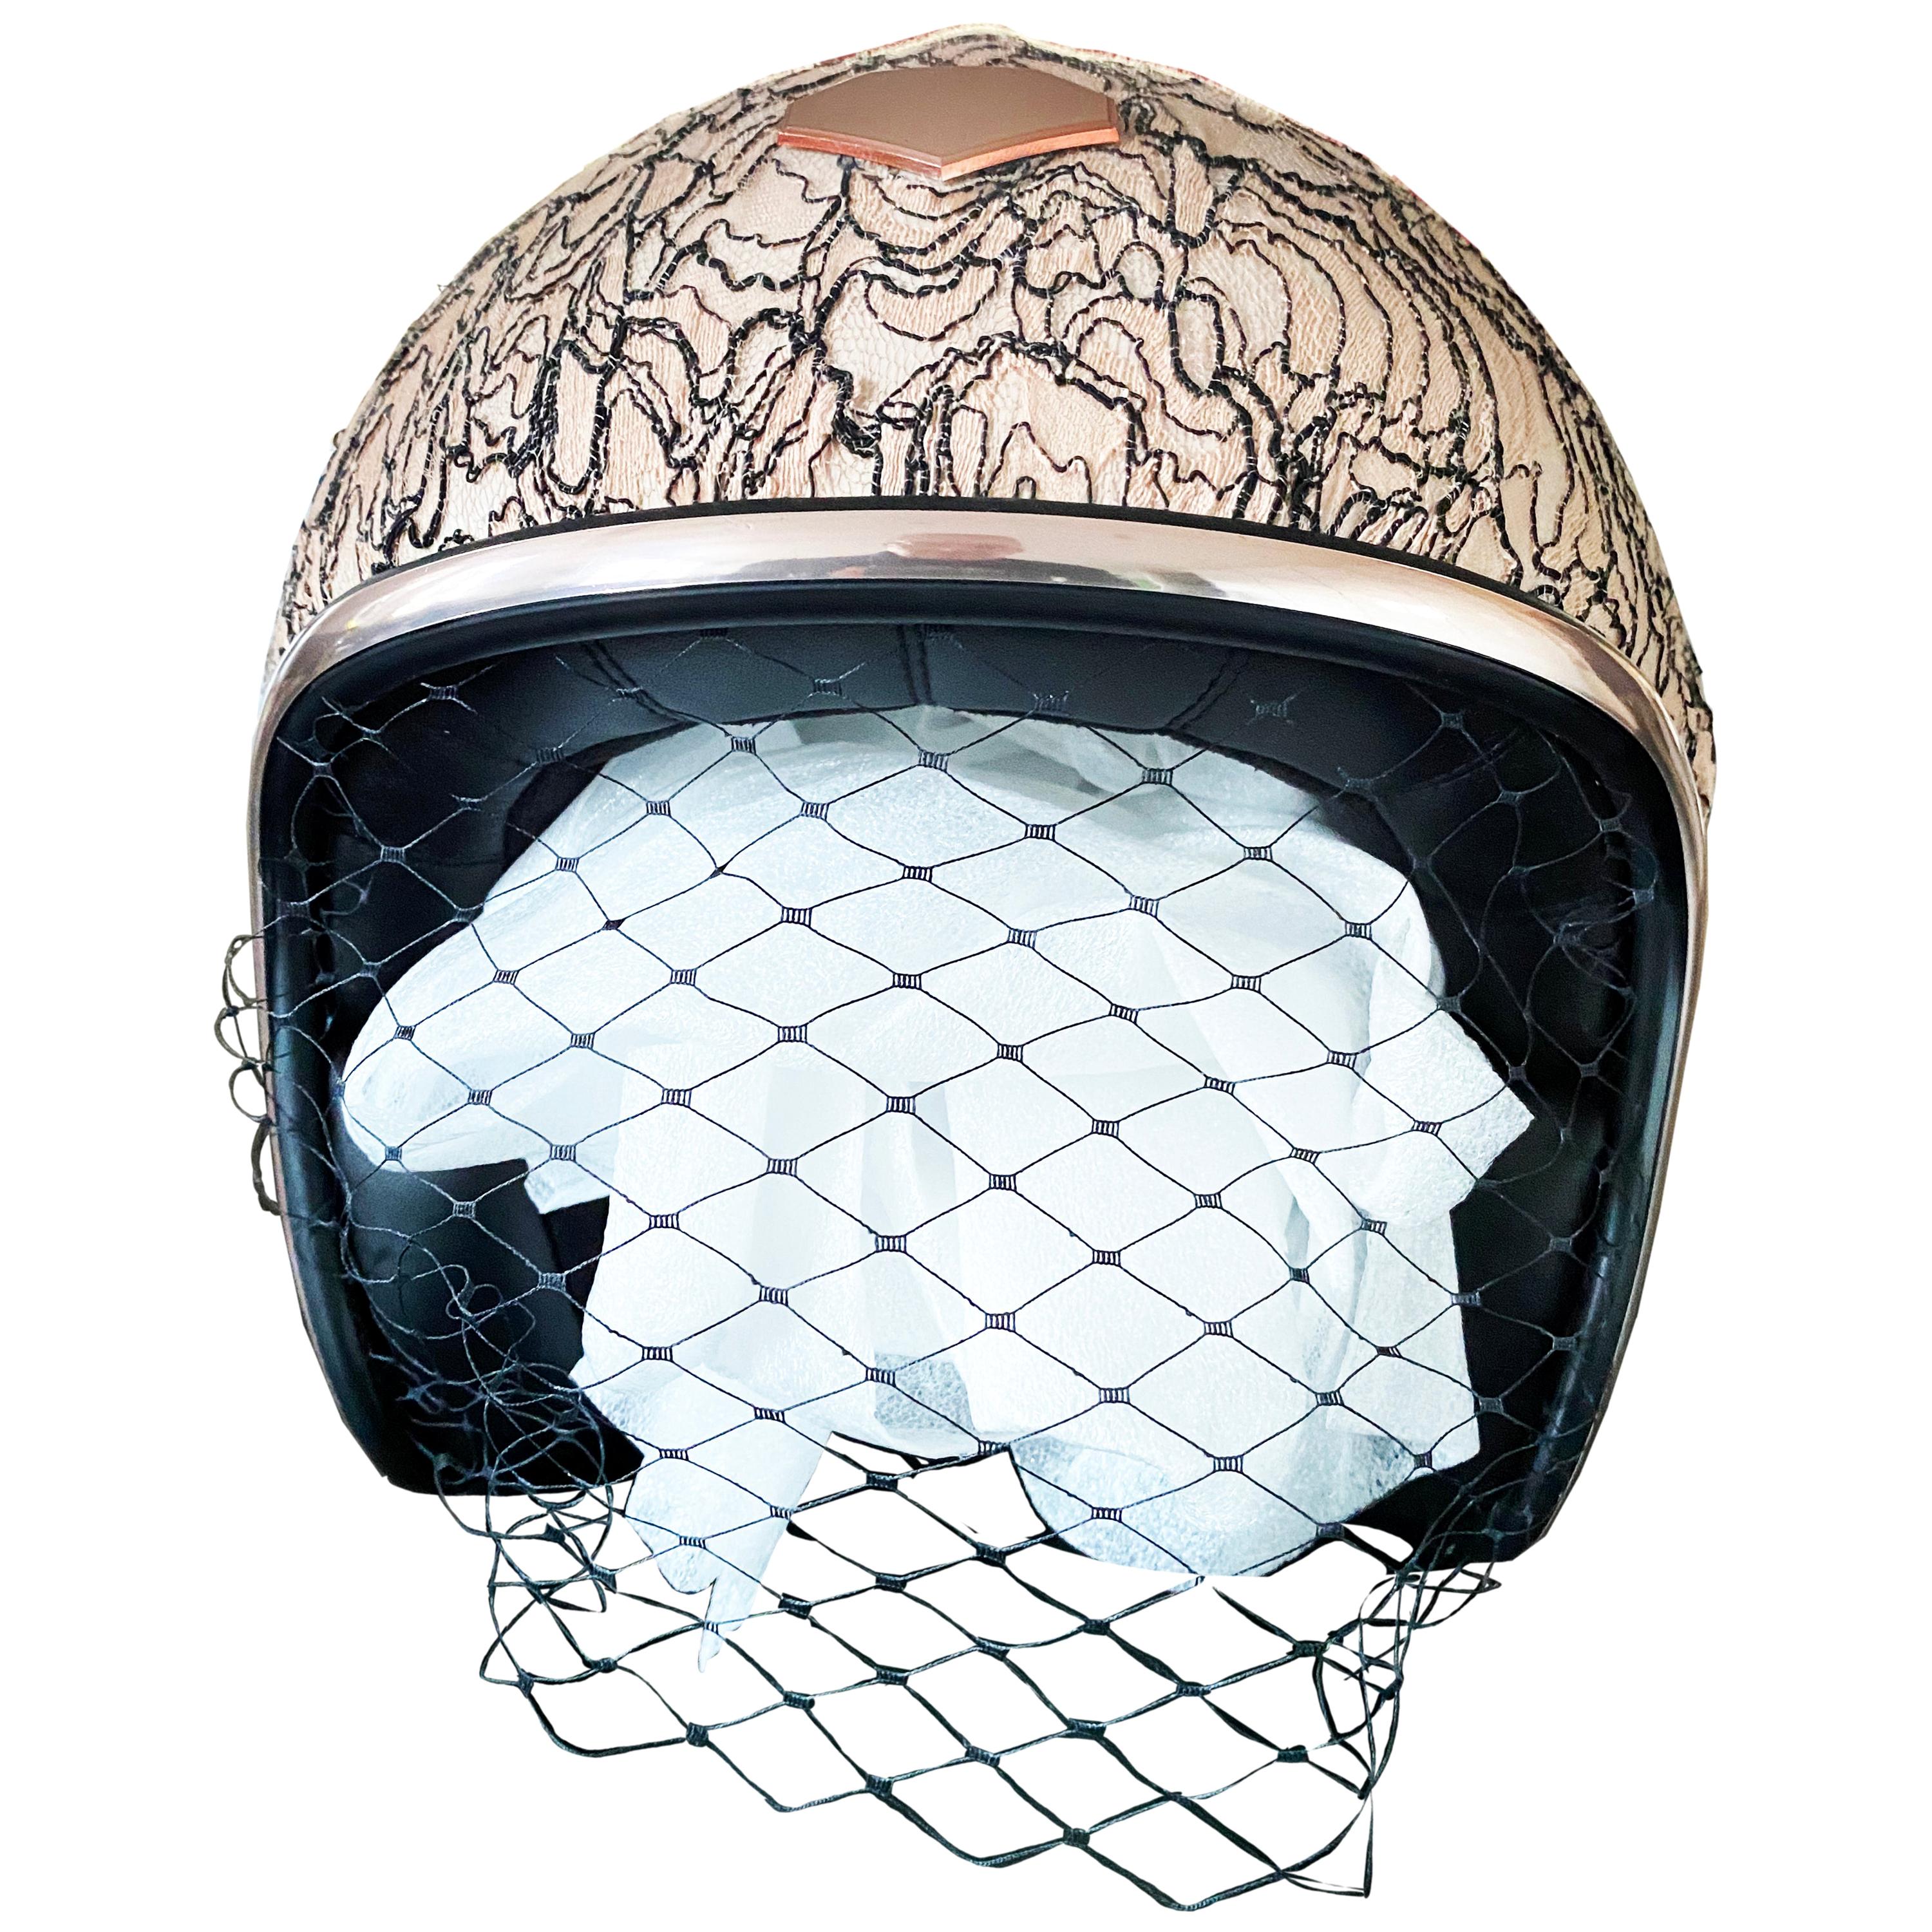 Ruby" Helmet for Christian Dior For Sale at 1stDibs